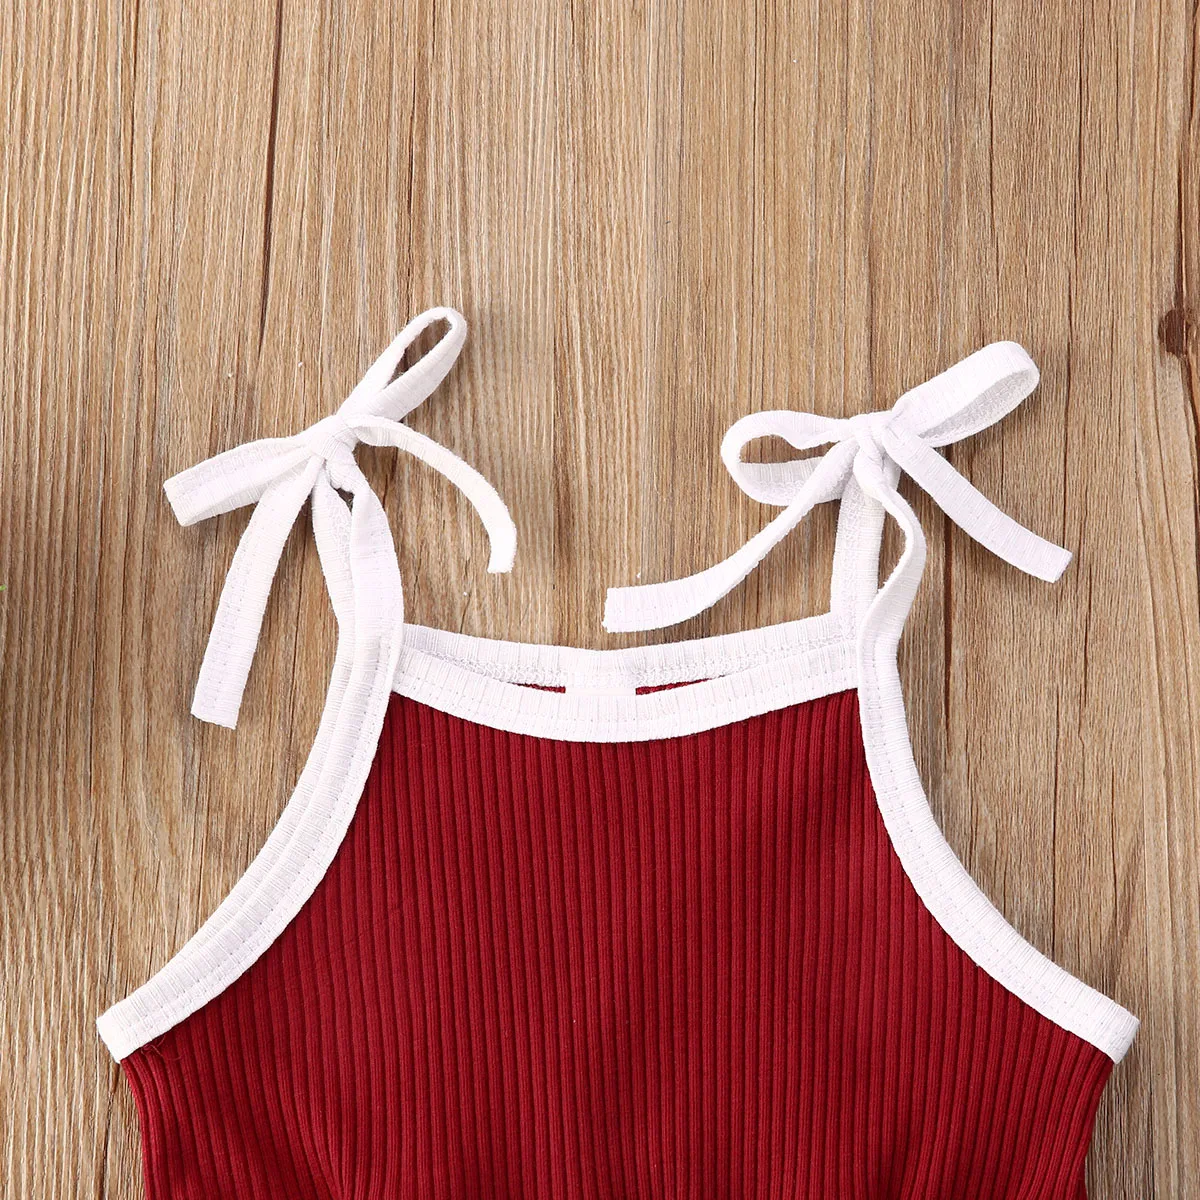 0-5Y Summer Infant Baby Girls Rompers Overalls Solid Sleeveless Belt Jumpsuits Lovely Clothes 4 Colors carters baby bodysuits	